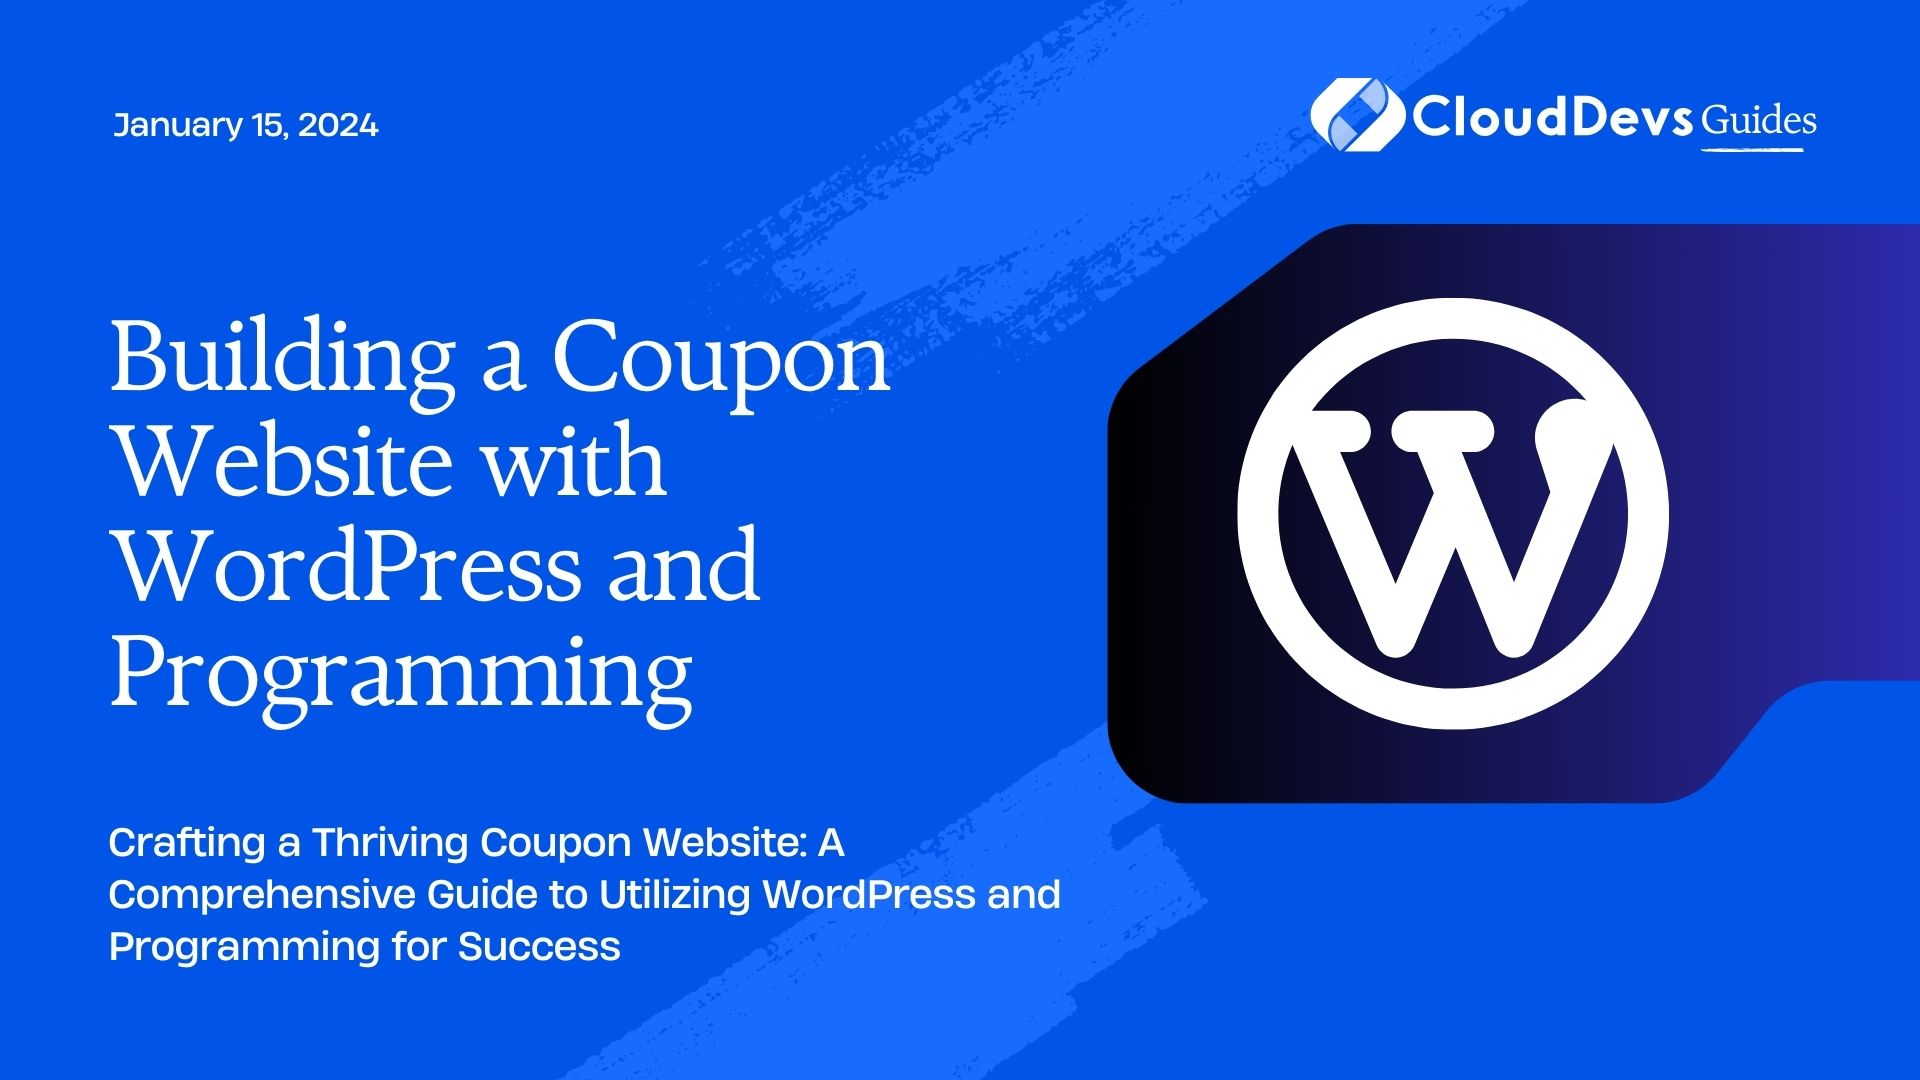 Building a Coupon Website with WordPress and Programming